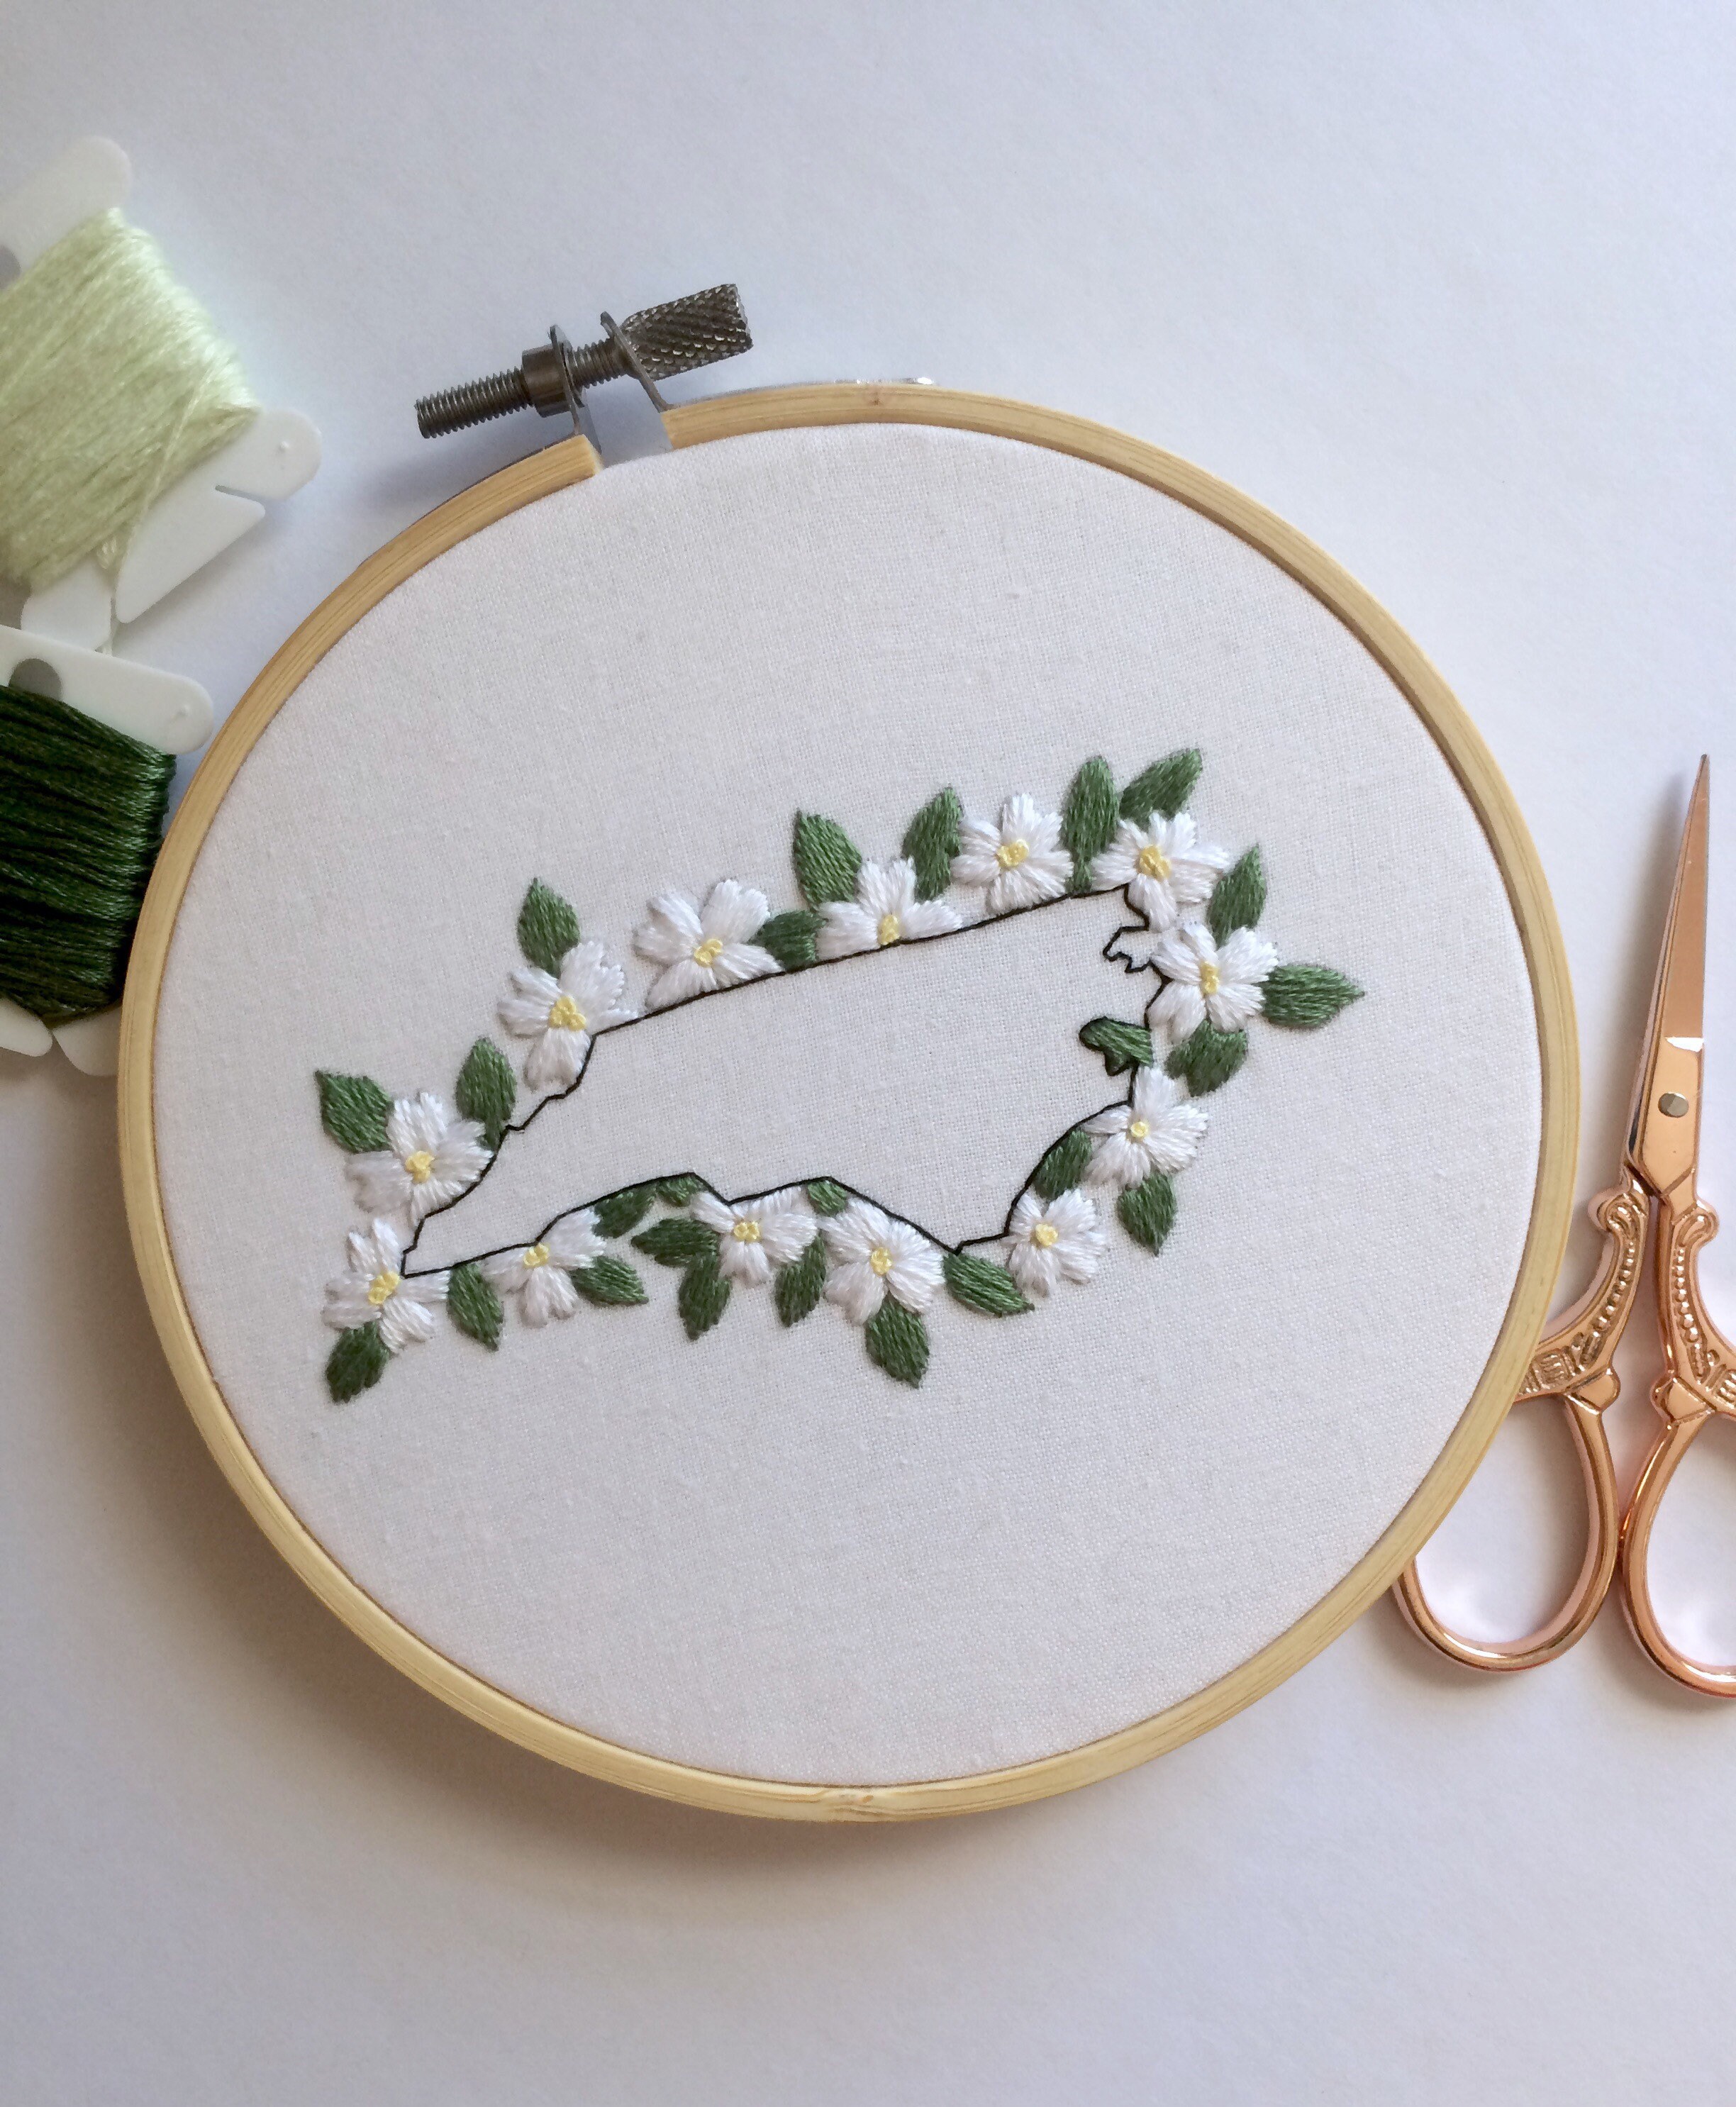 12 Embroidery Projects for Beginners - ORDNUR